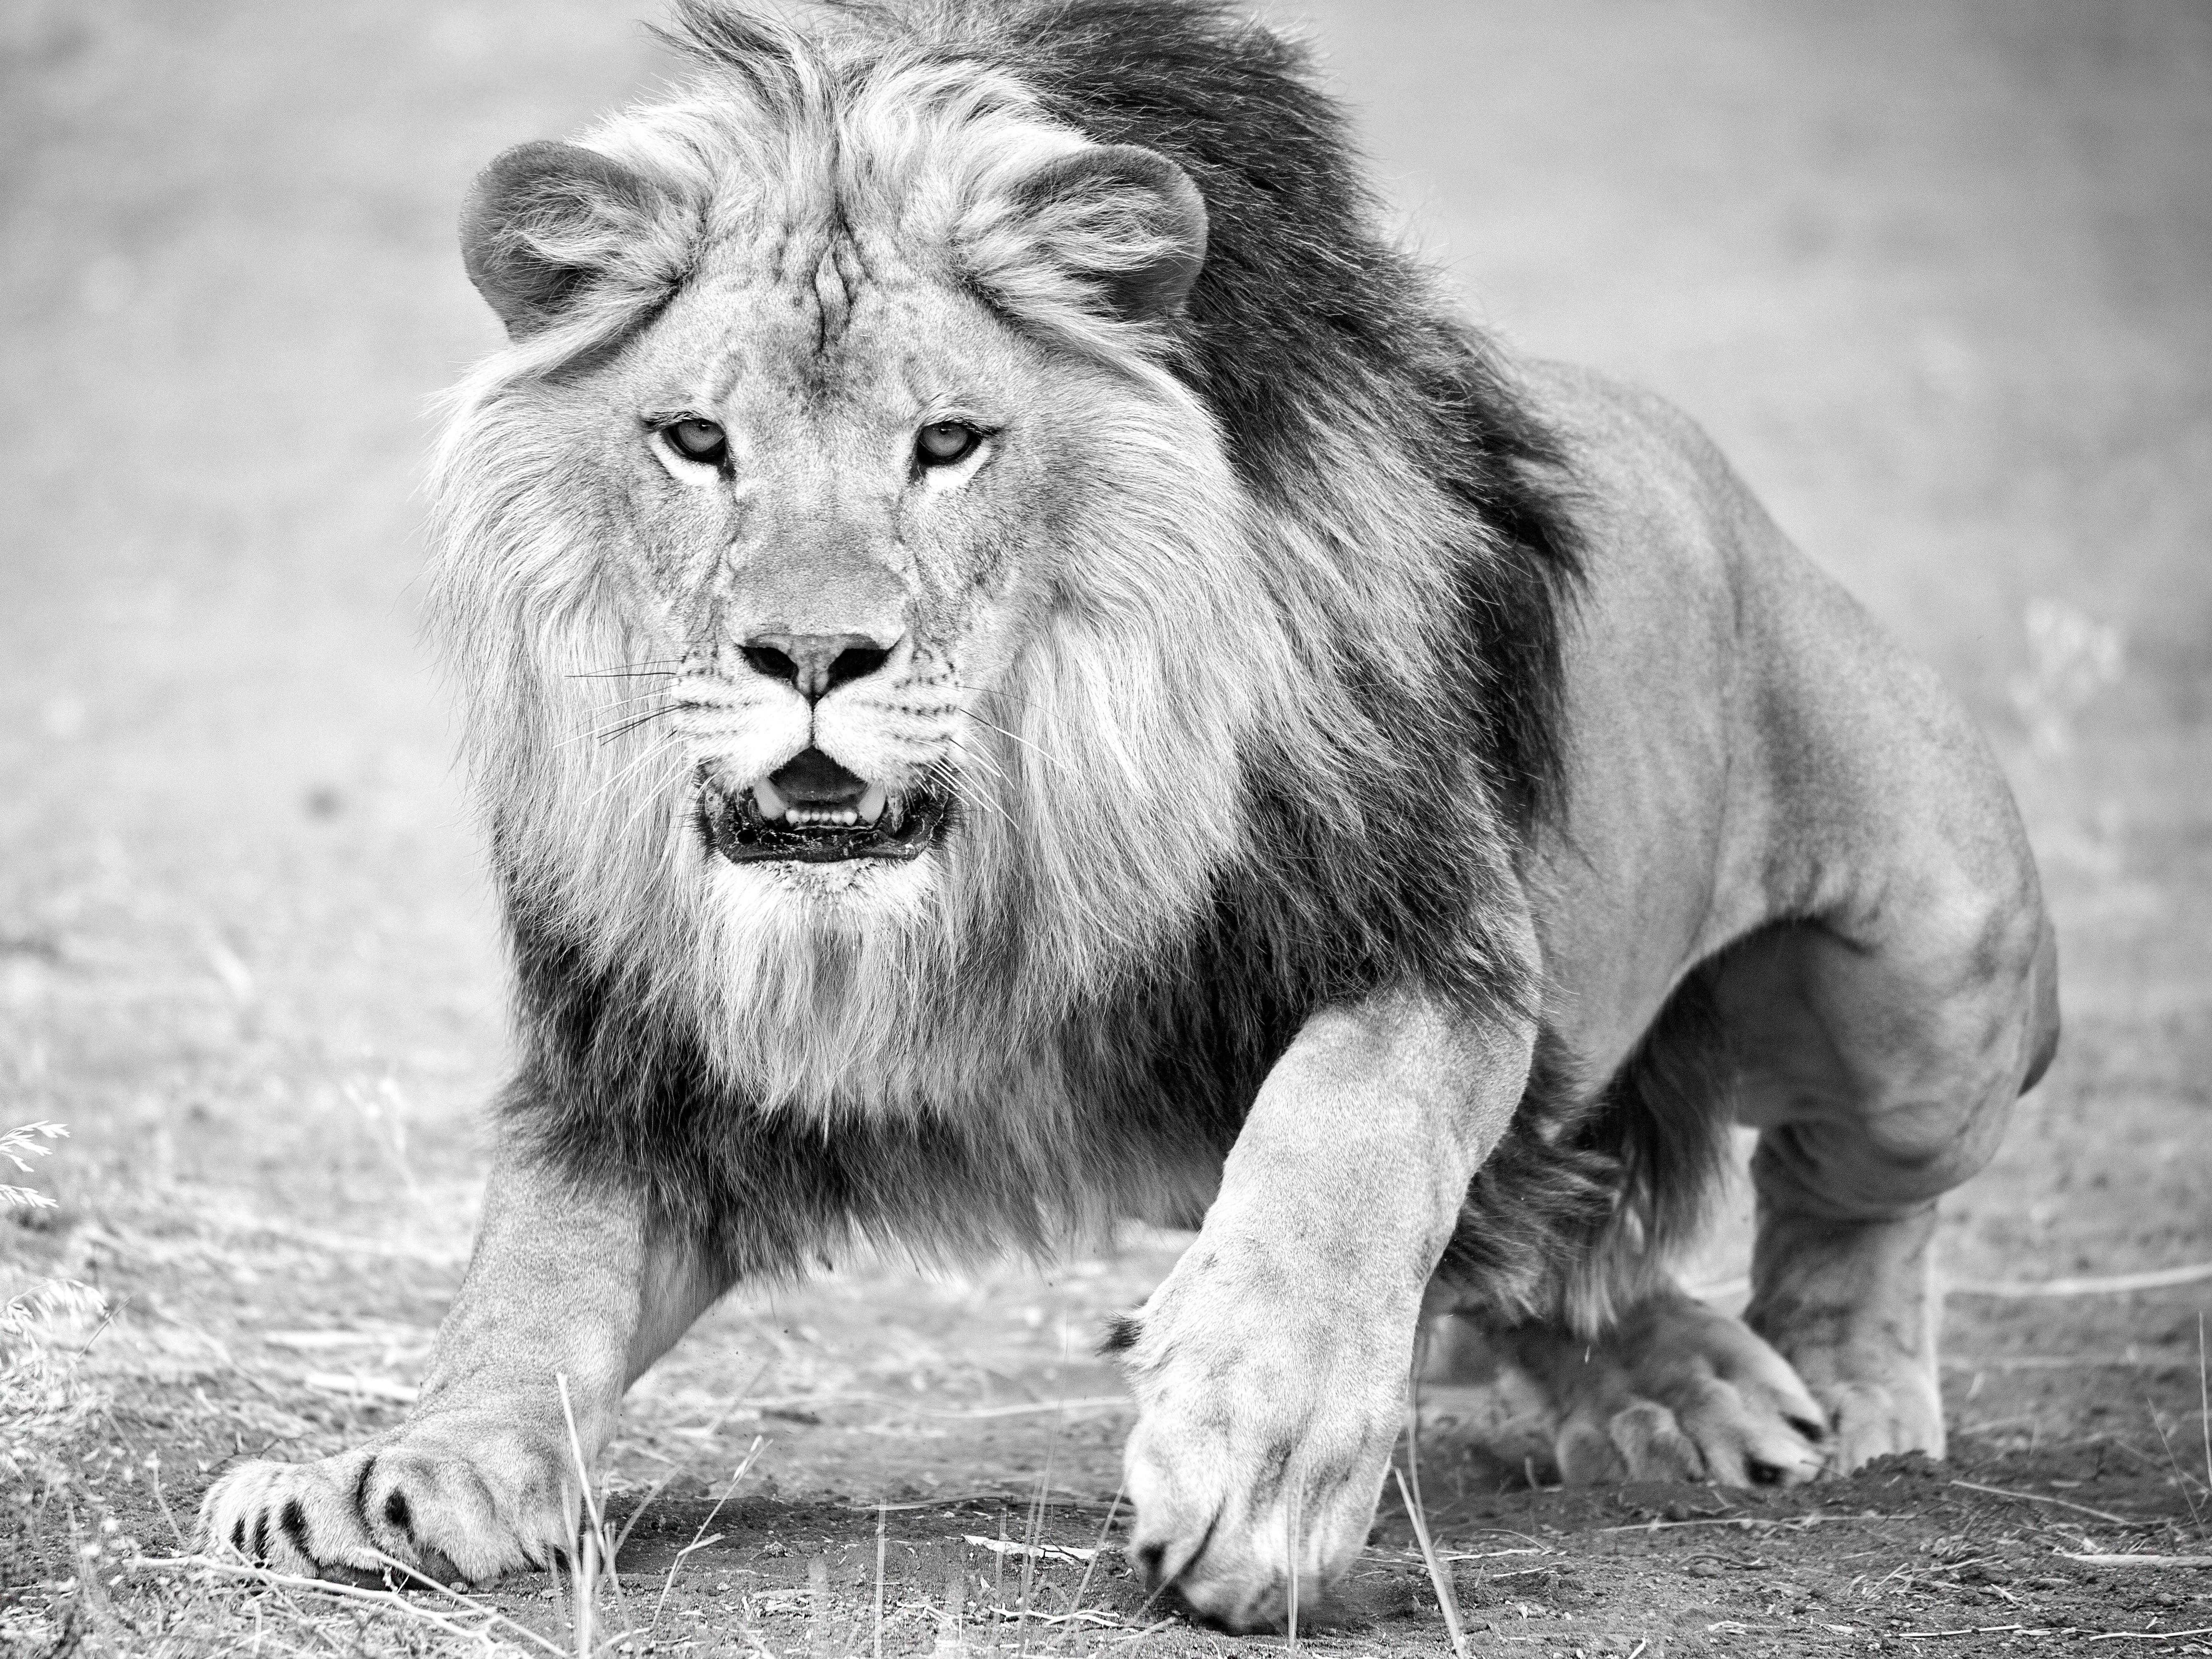 Shane Russeck Animal Print - "The Charge" 36x48 - Black & White Photography, Lion Photograph Unsigned Print